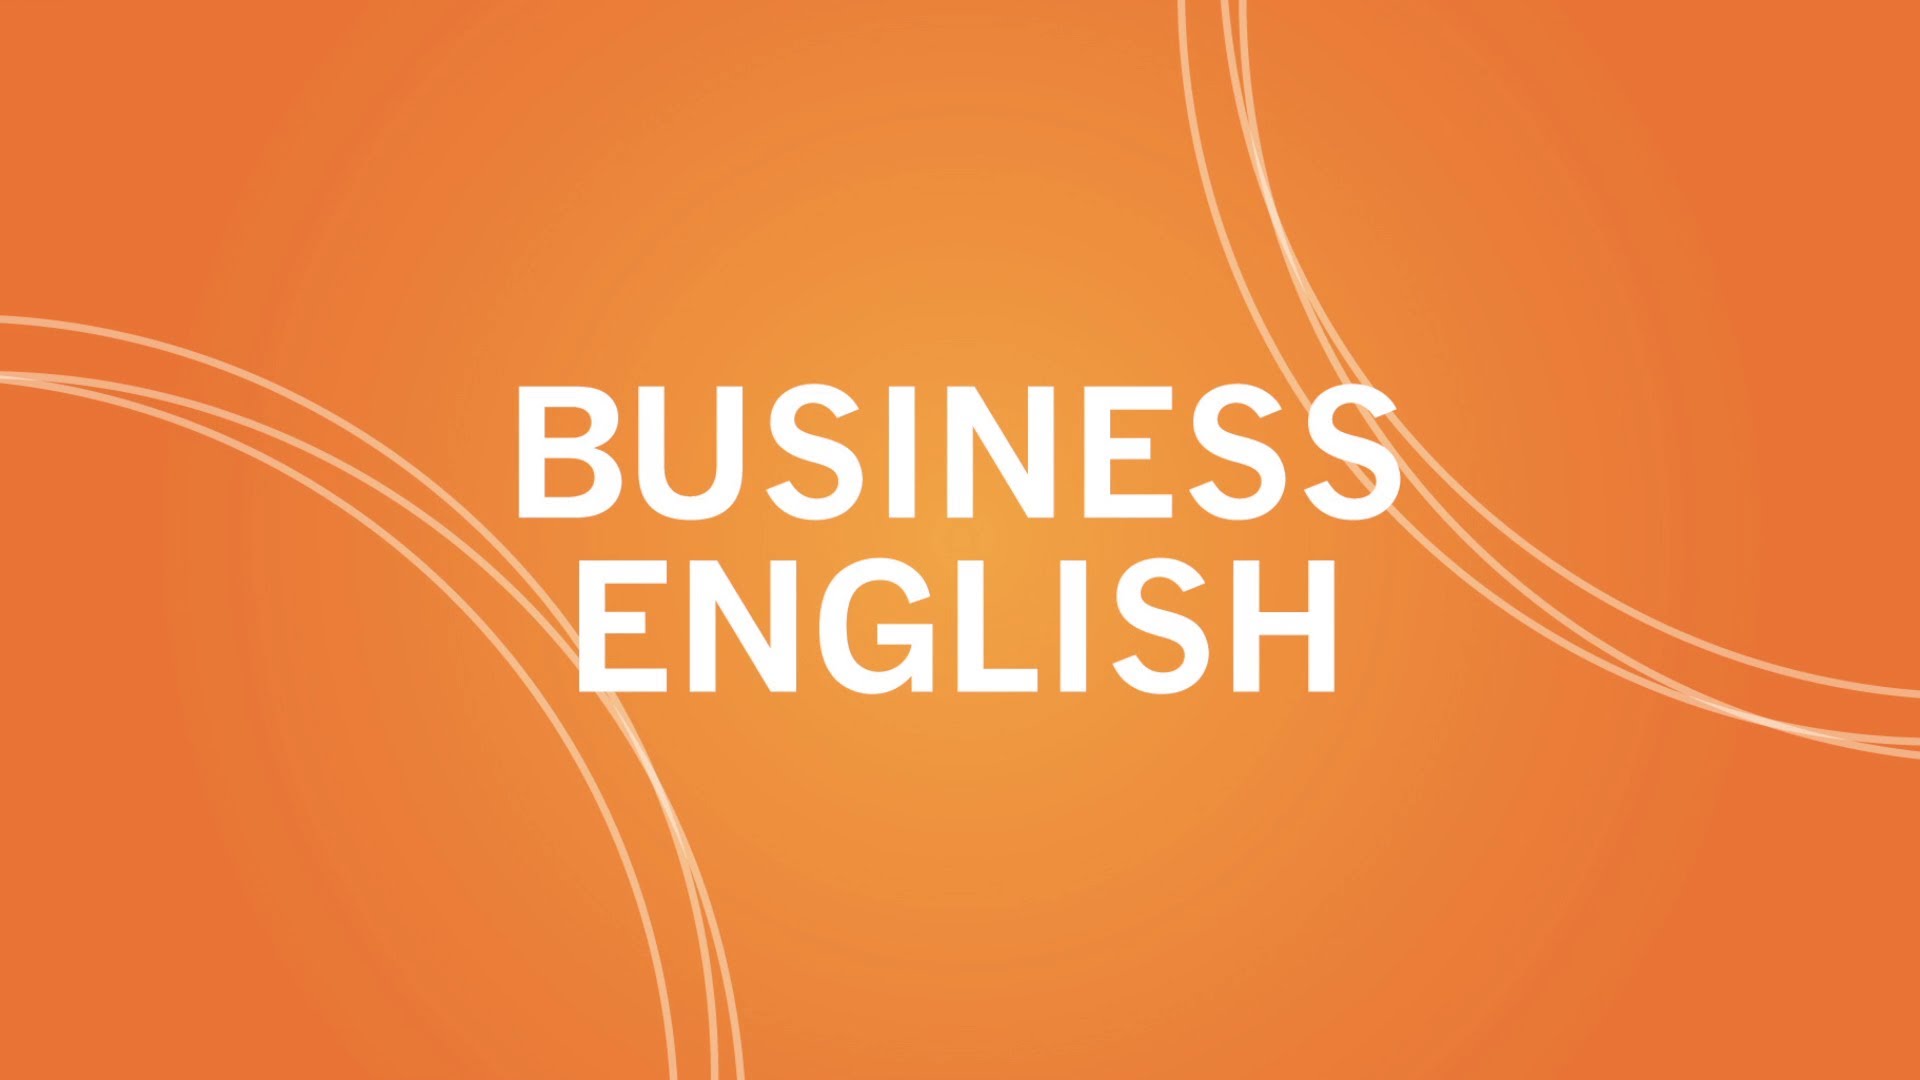 Learn Business English